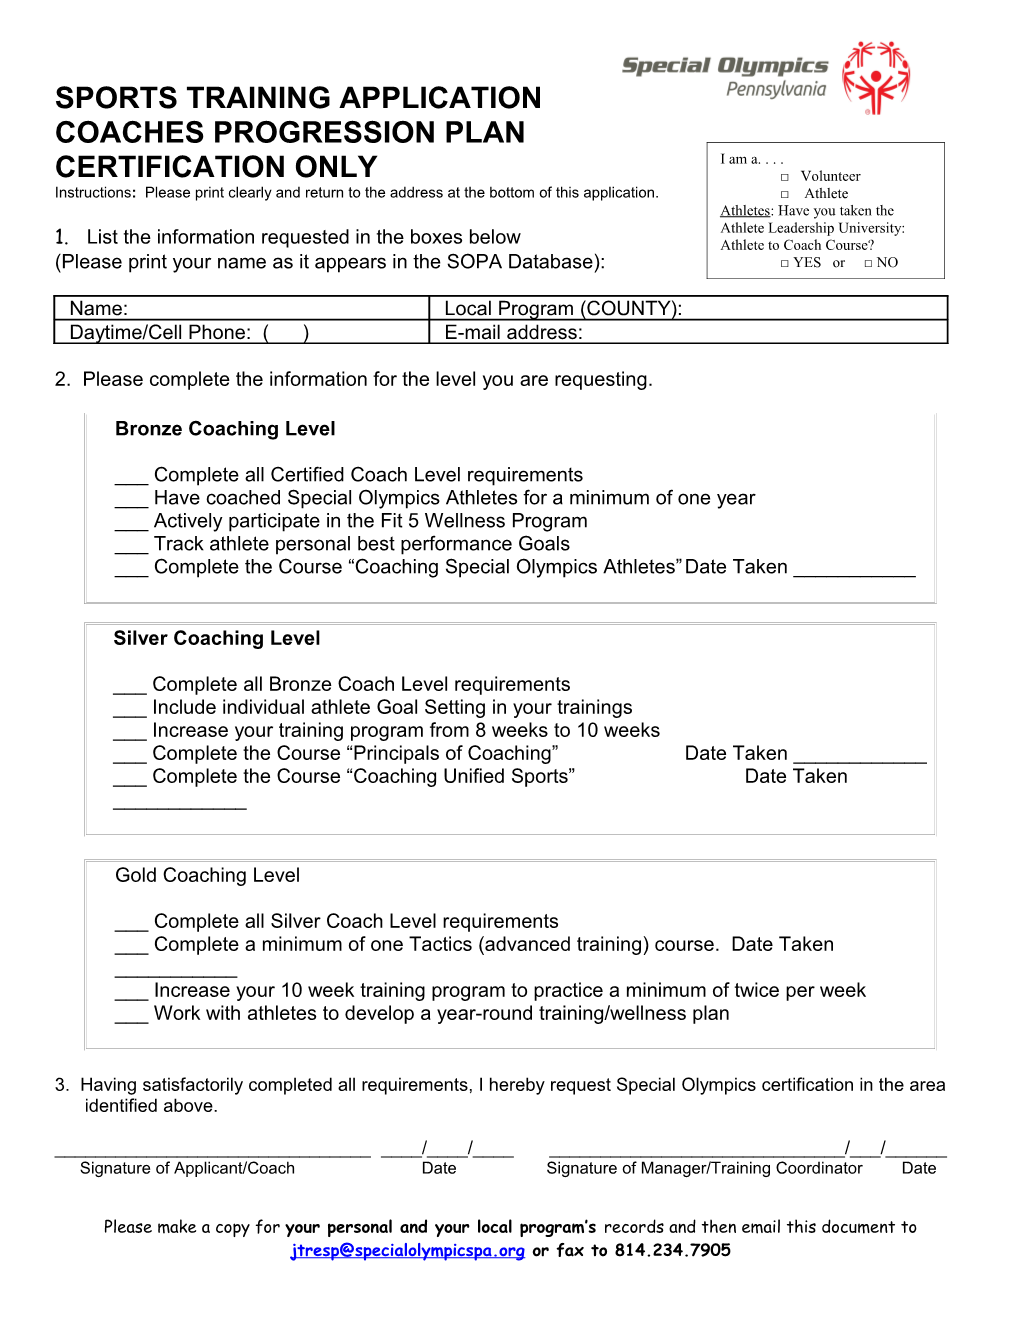 Application for Sports Training Certification